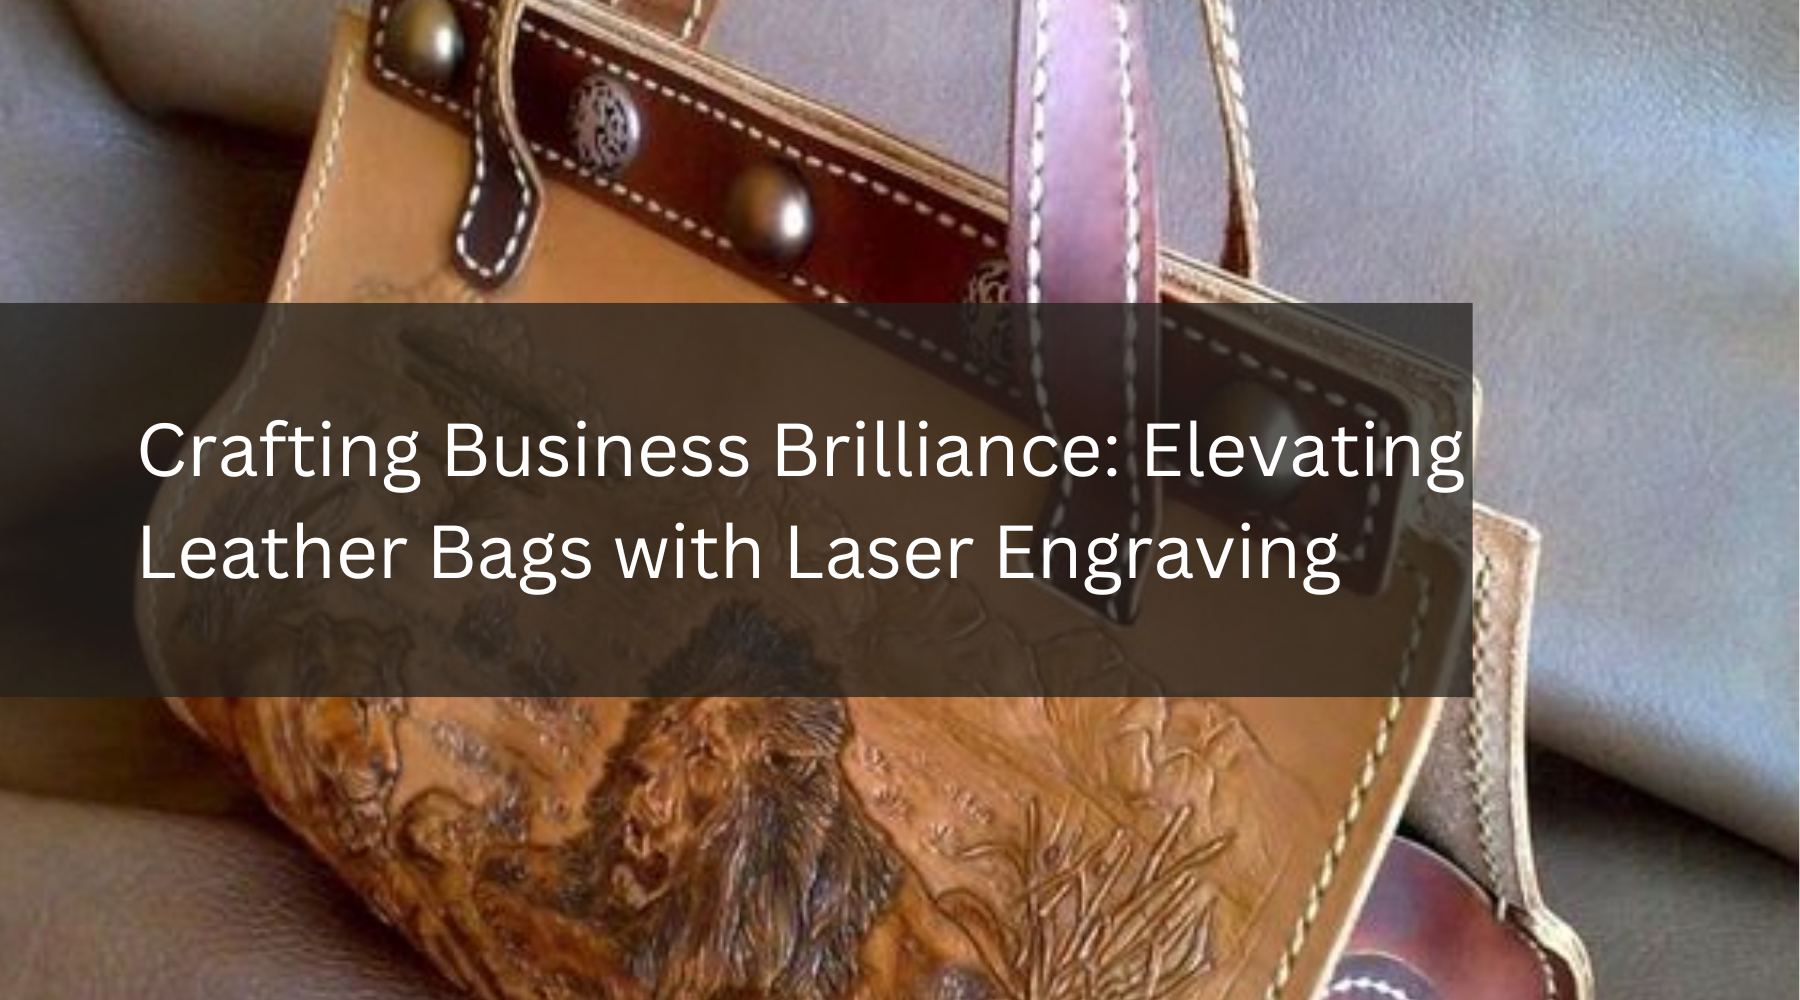 Crafting Business Brilliance: Elevating Leather Bags with Laser Engraving